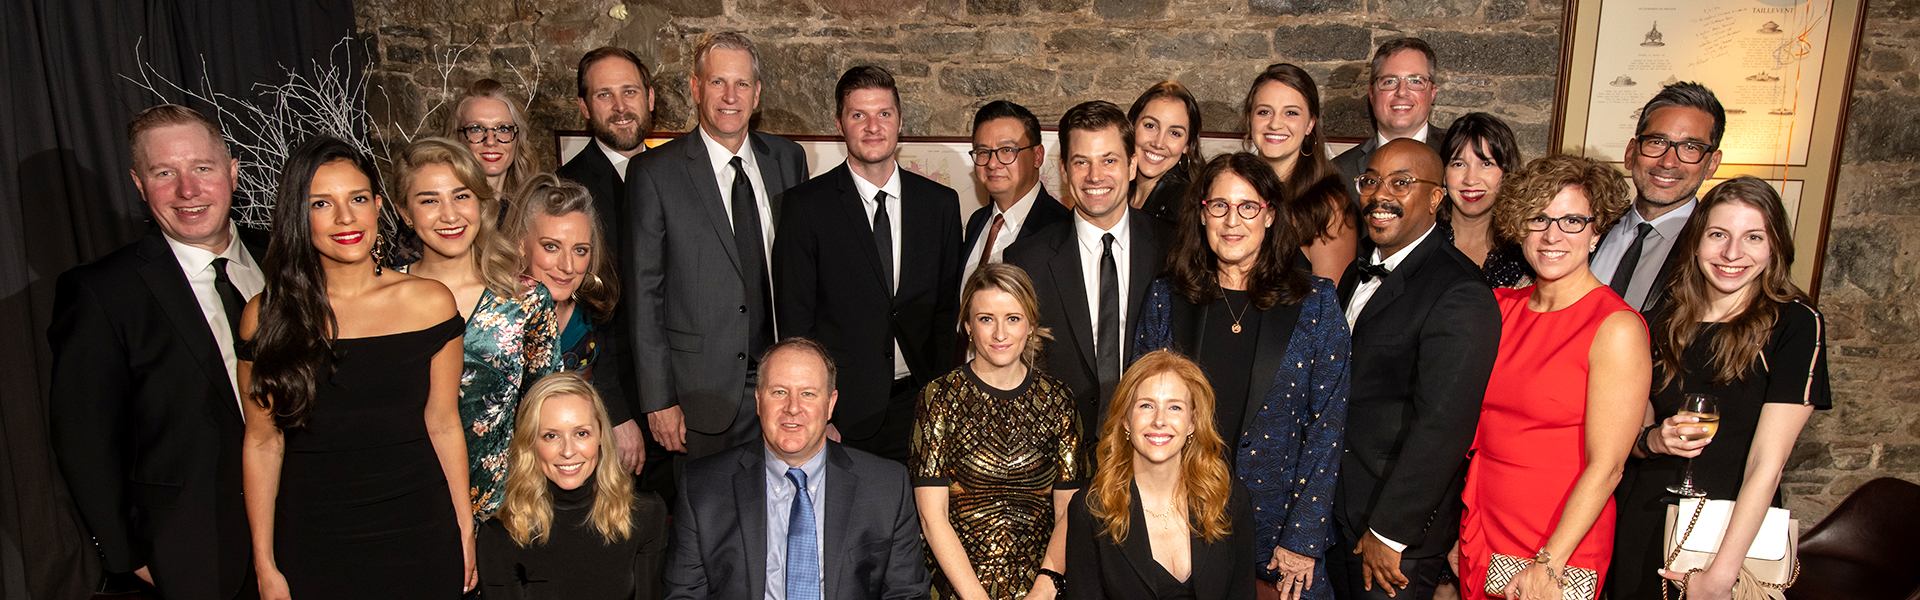 WE Leadership gathers in New York City for PRWeek Awards 2019